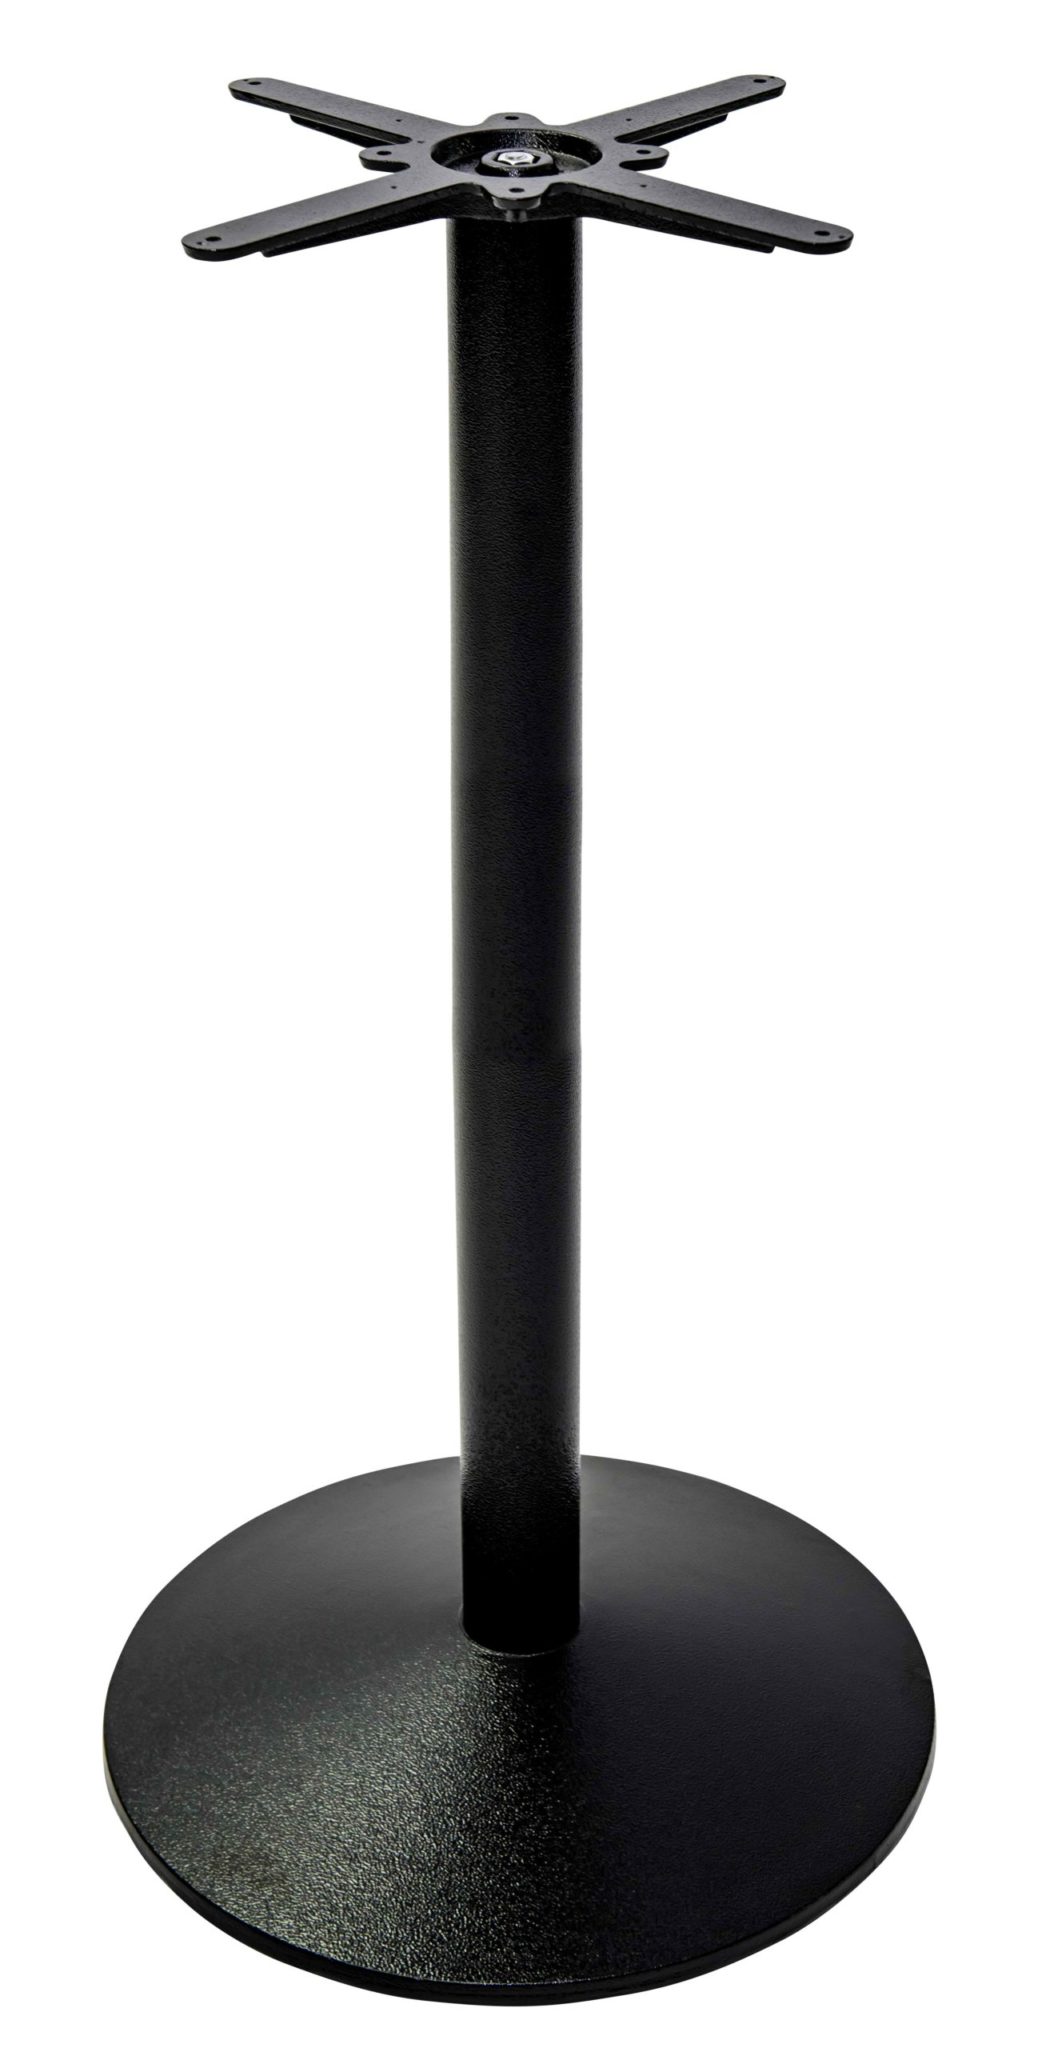 Black cast iron dome table base - Large 1080 mm